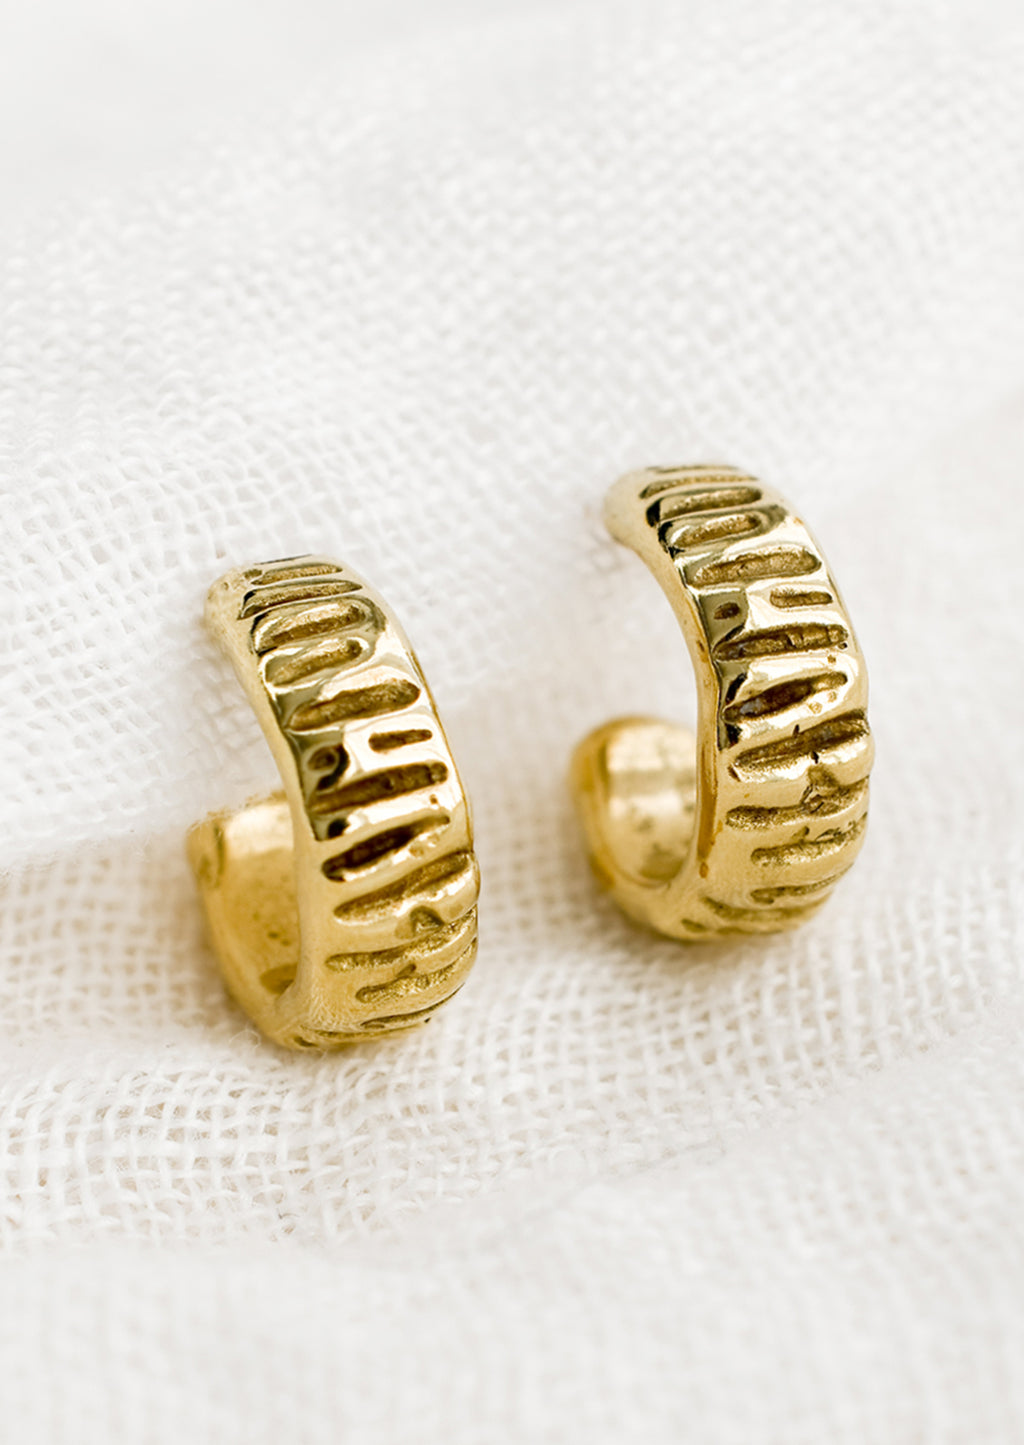 1: A pair of small brass hoop earrings with line texture.